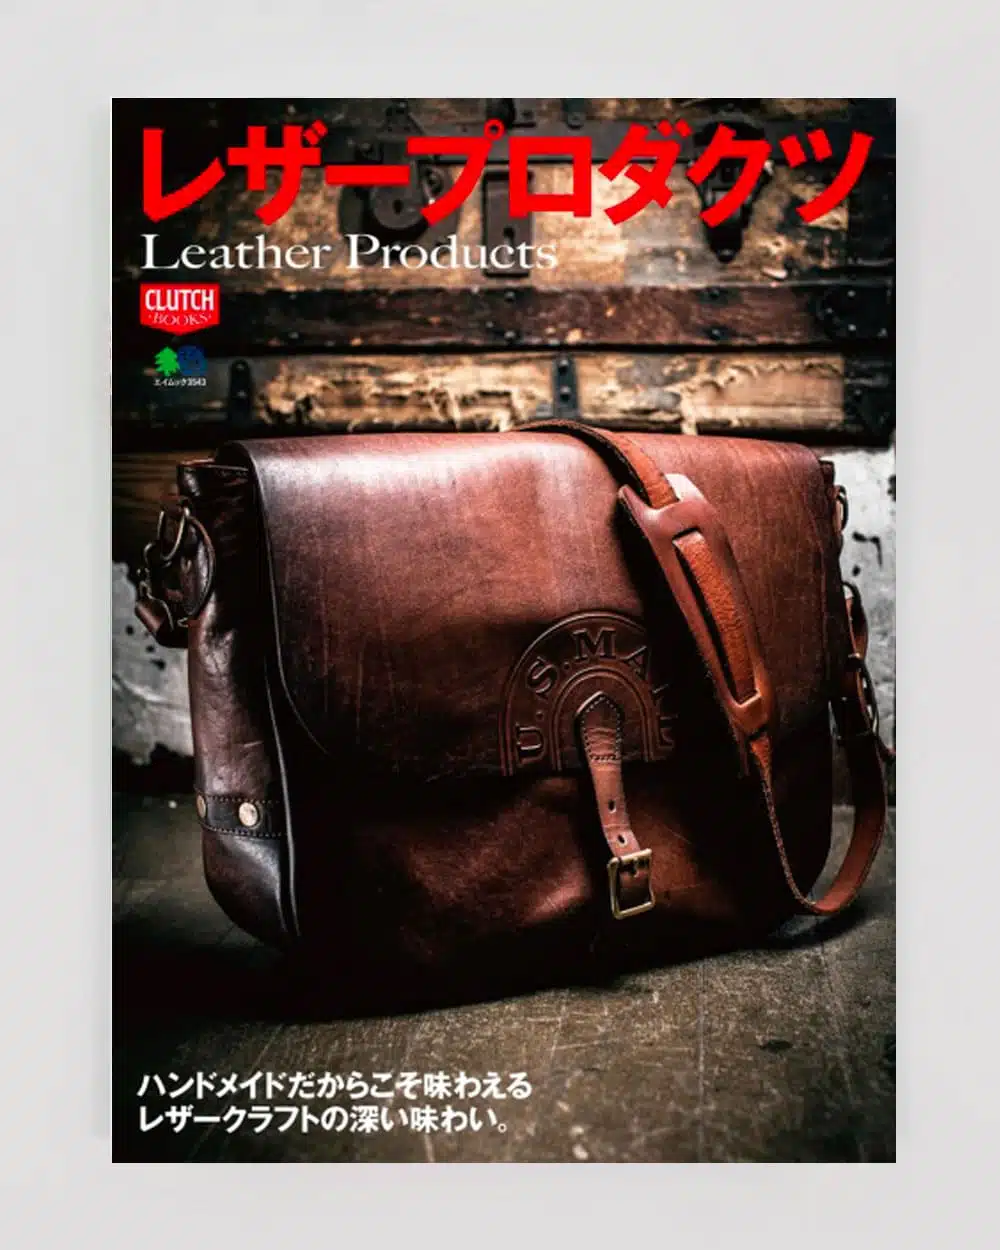 Clutch Magazine Leather Products